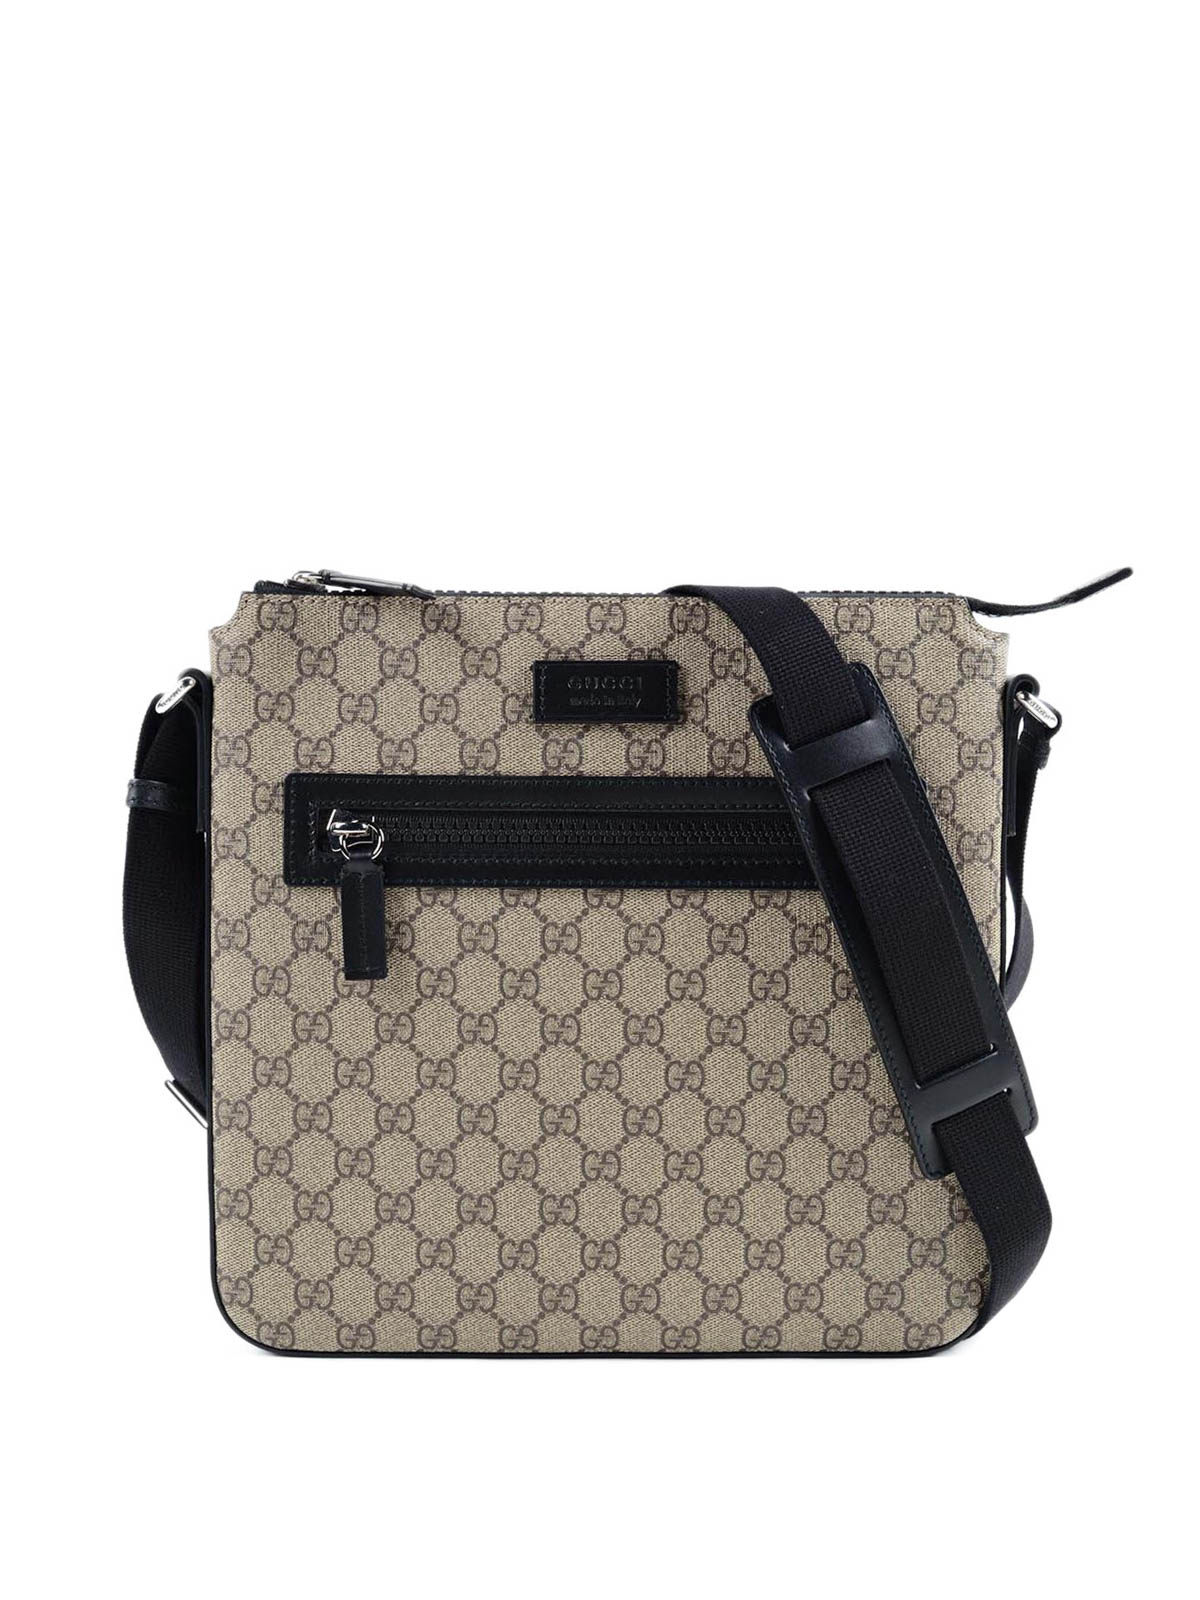 GG Supreme crossbody by Gucci - cross body bags | Shop online at mediakits.theygsgroup.com